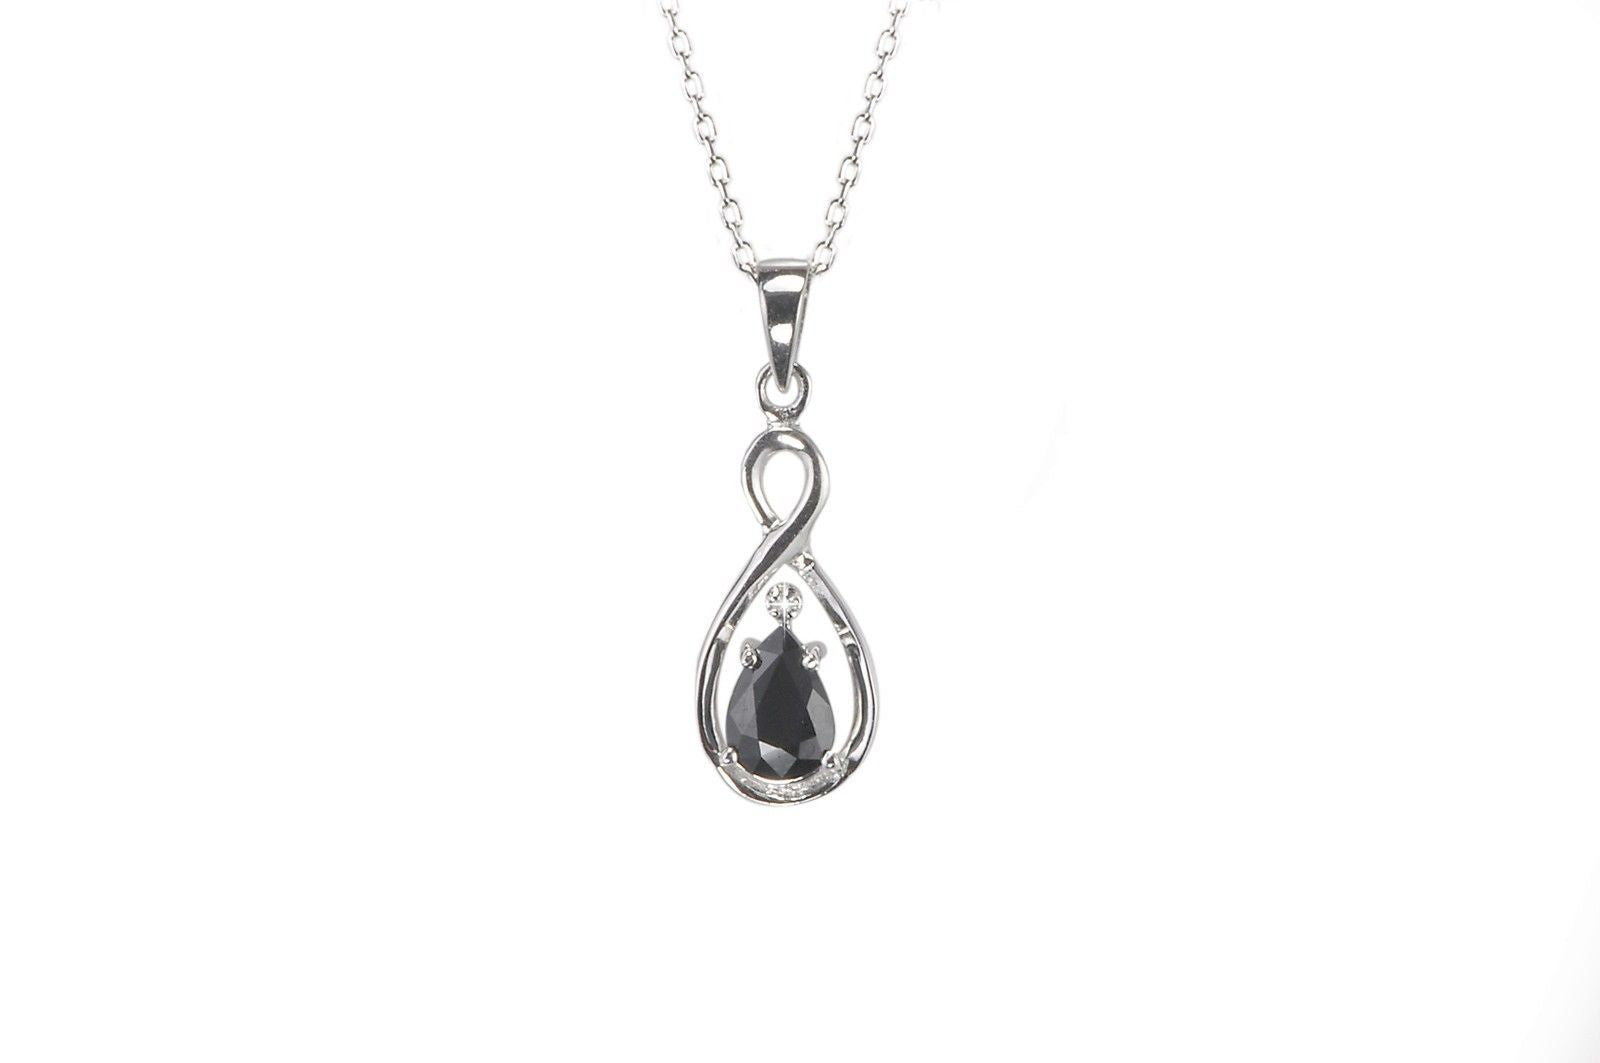 .01ct tw Diamond Louisiana State of Mind Necklace in Sterling Silver